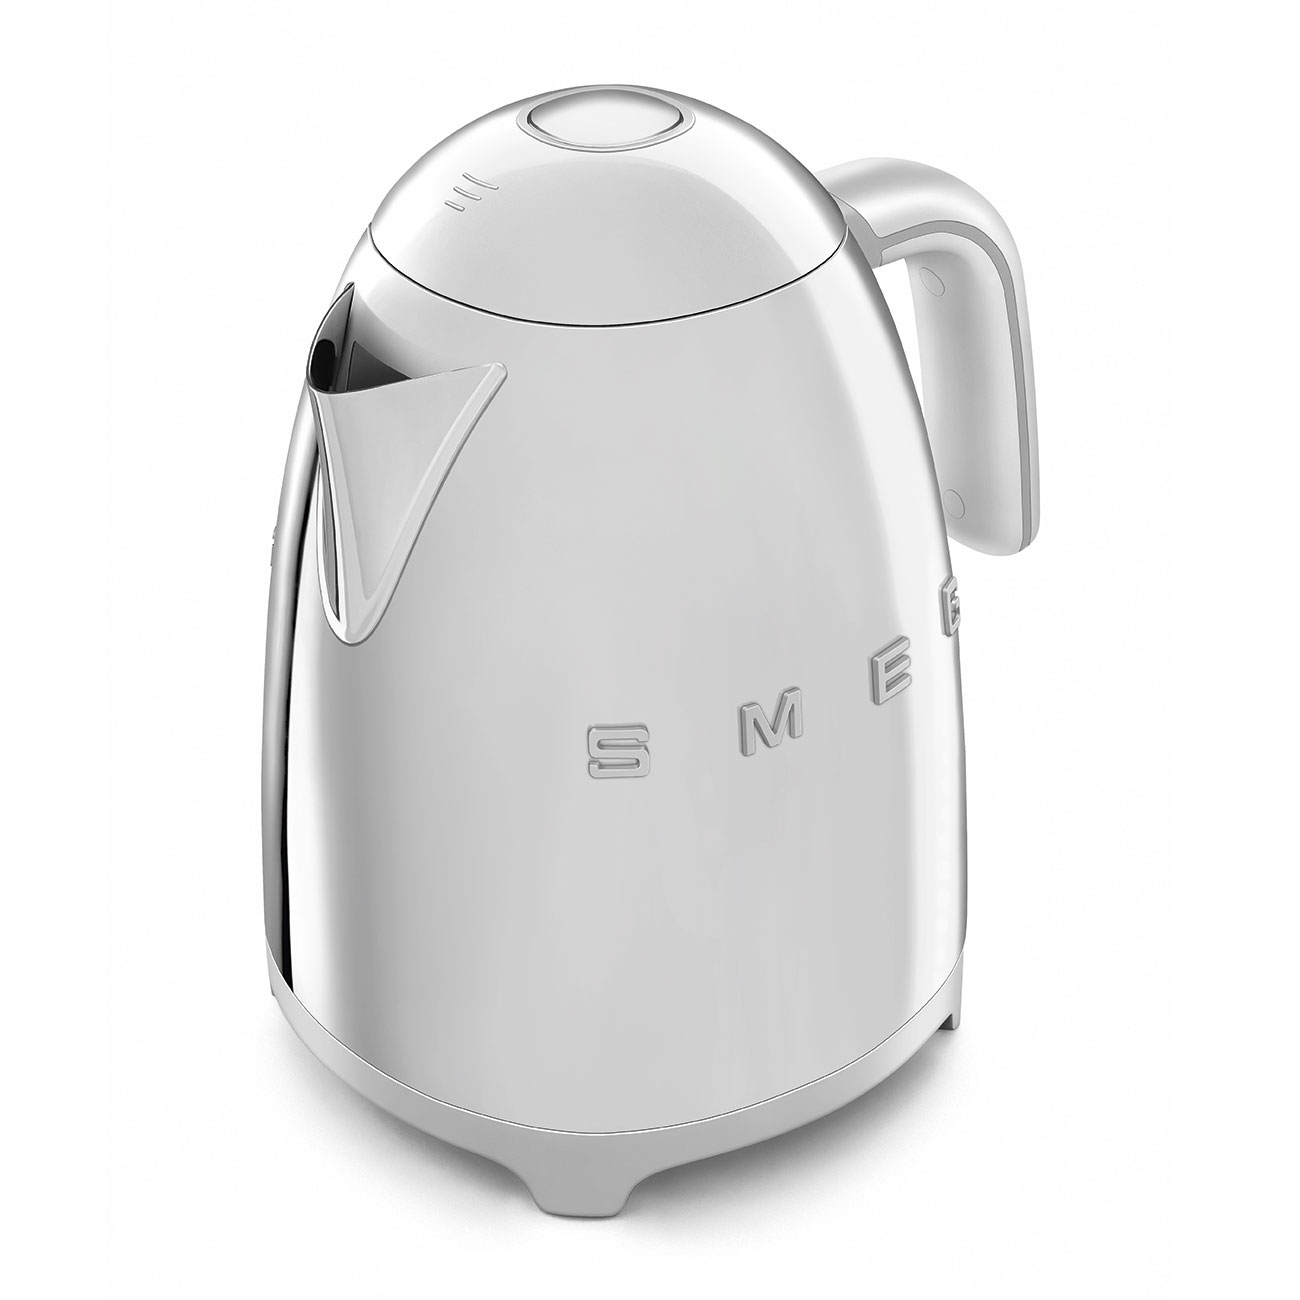 Smeg 50's Retro Style KLF04 Stainless Steel Kettle ** Missing The Power  Base **